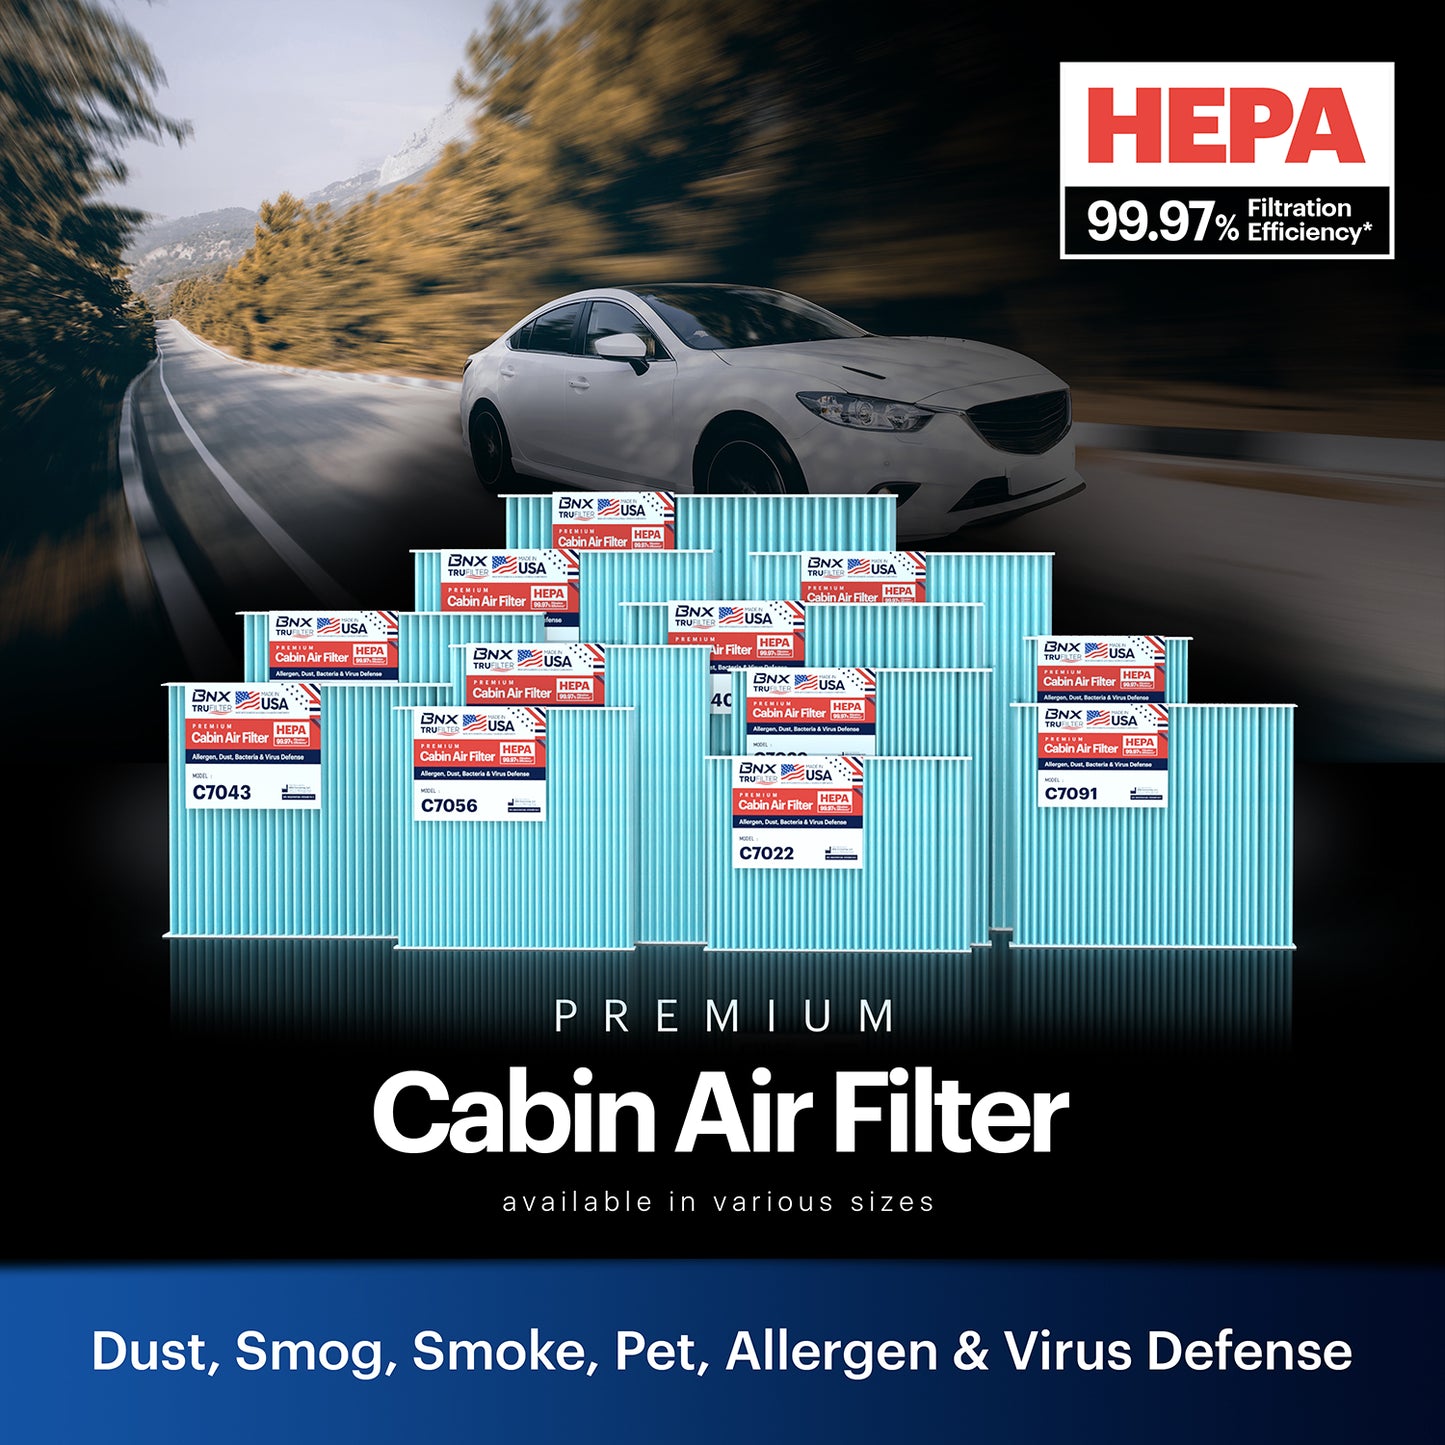 BNX TruFilter C7055 Cabin Air Filter, HEPA 99.97%, MADE IN USA, Compatible With Toyota Camry, Corolla, Highlander, RAV4, Tundra, Prius, 4Runner; Subaru Outback, Legacy; Lexus RX, GS, GX, IS, LS, ES